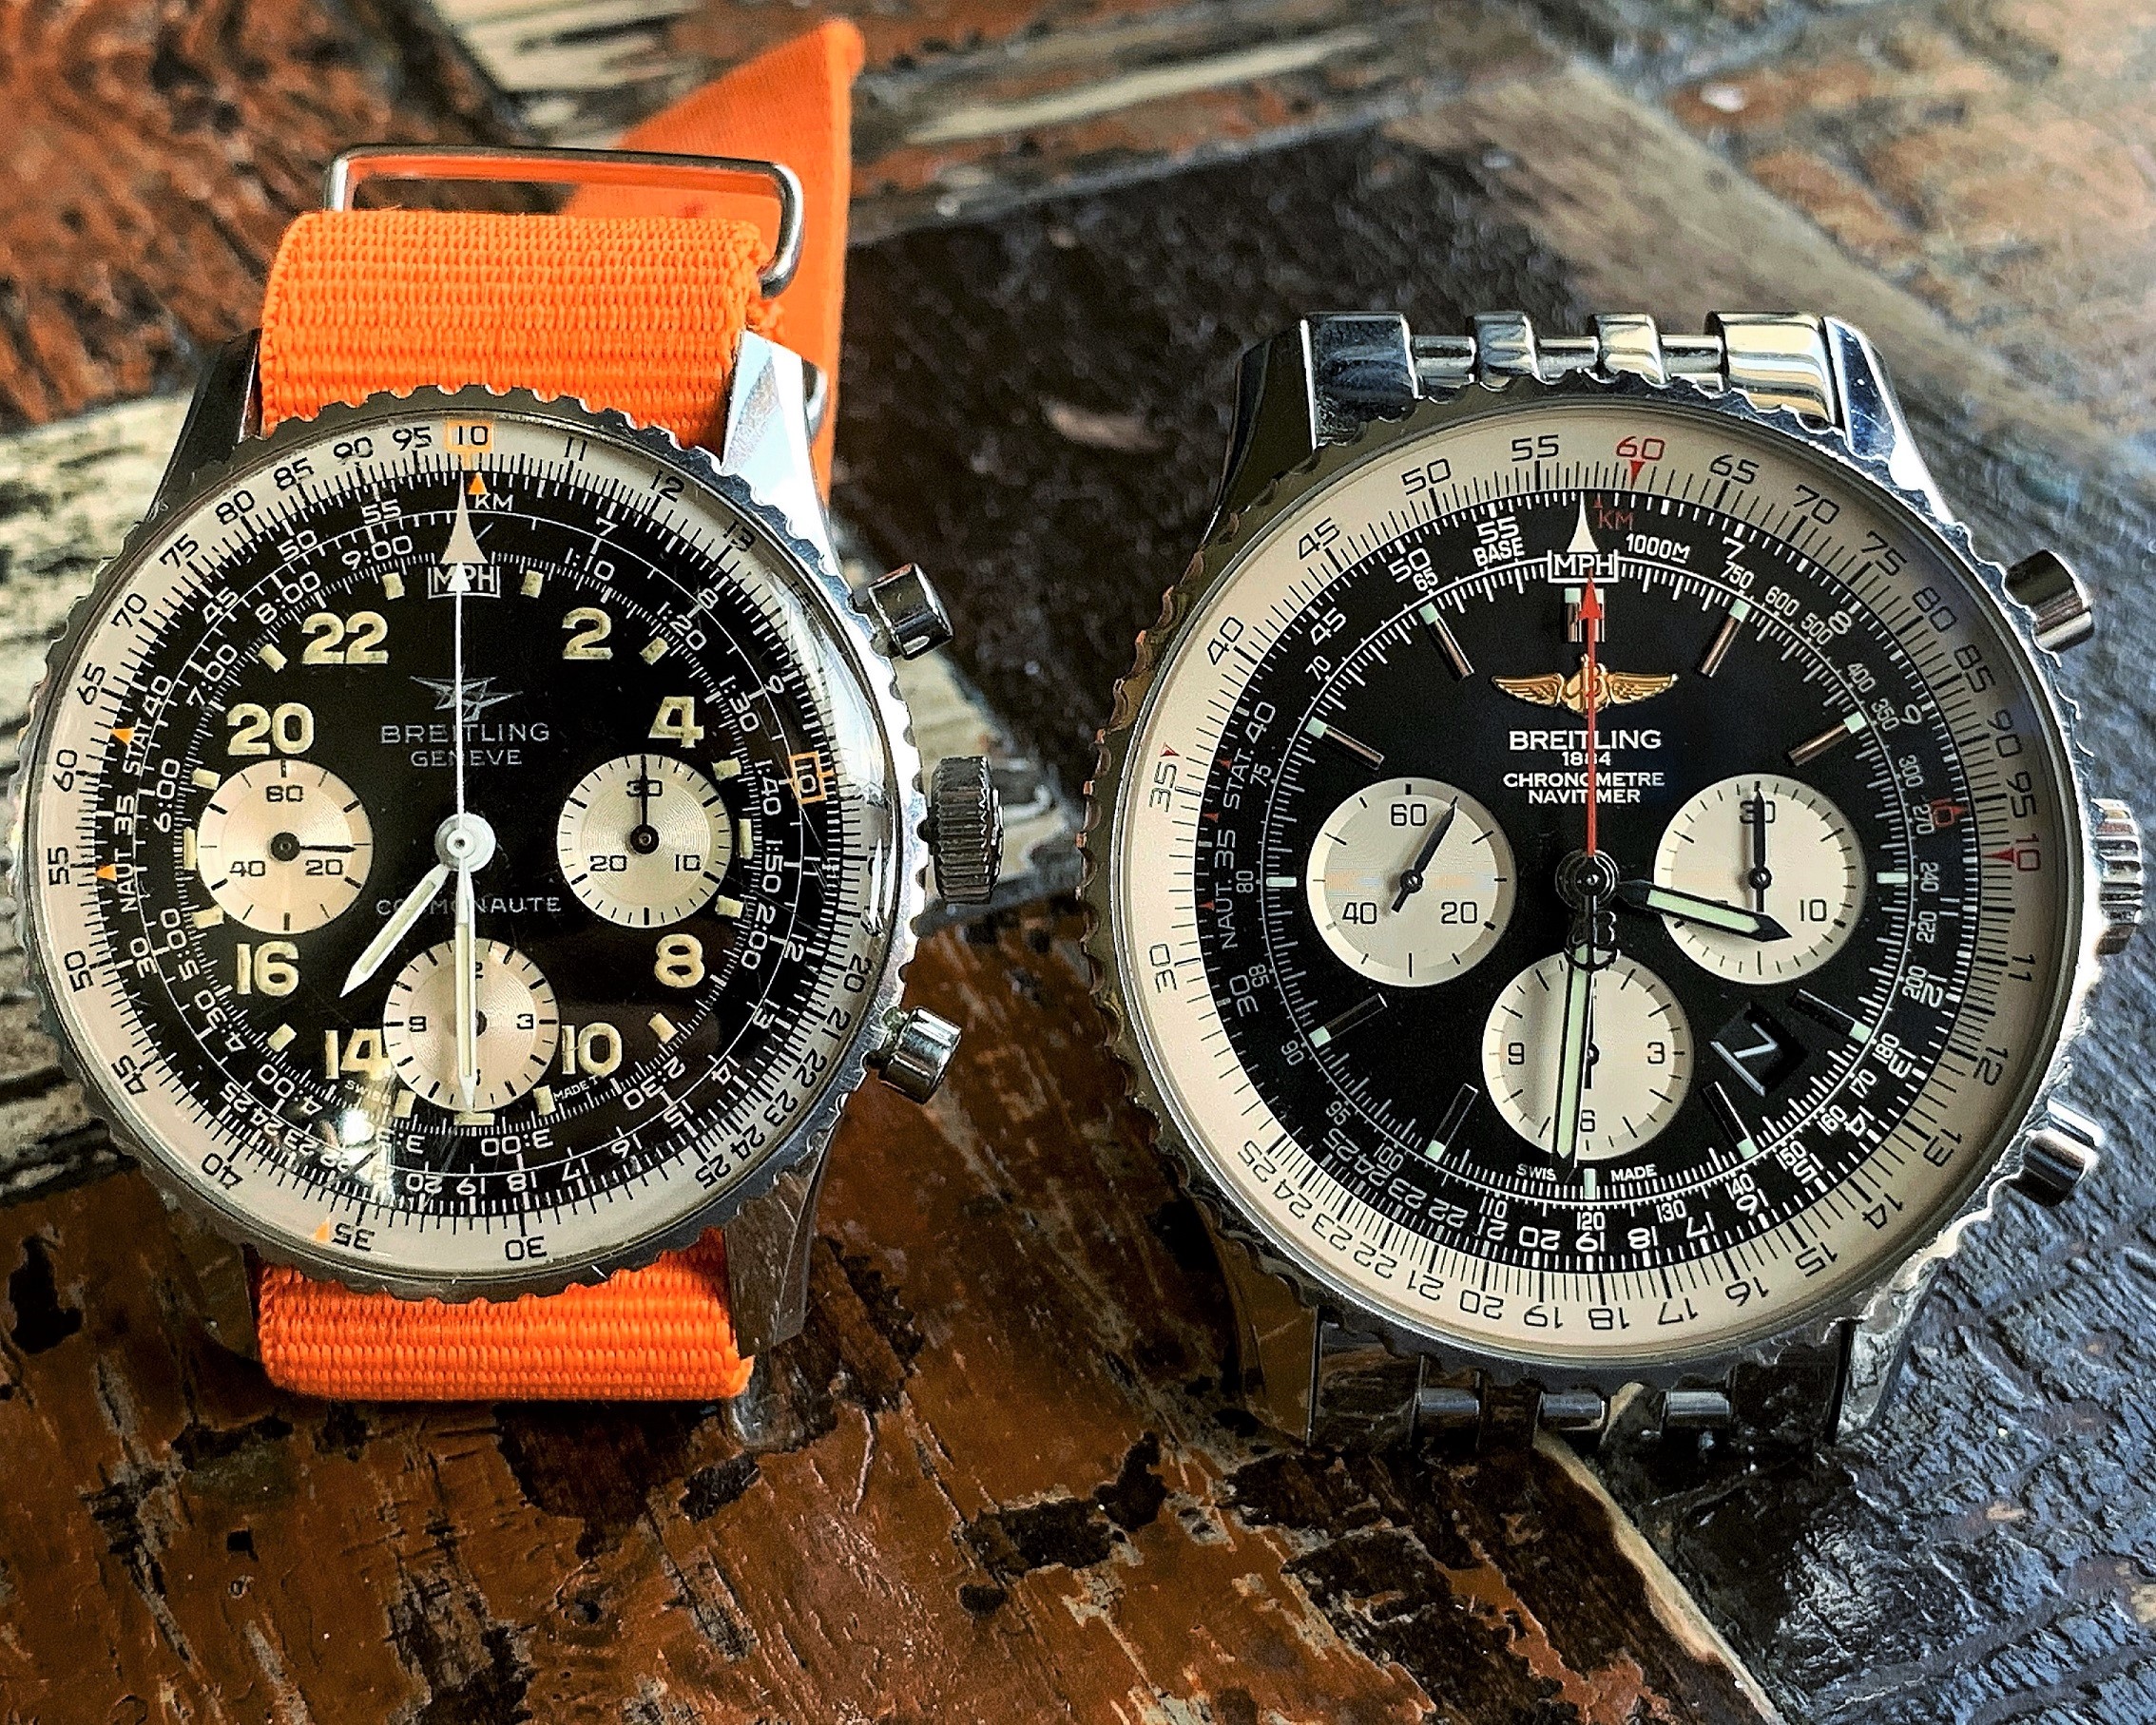 Vintage and modern watches - Breitling Cosmonaute and Navitimer pilots watches